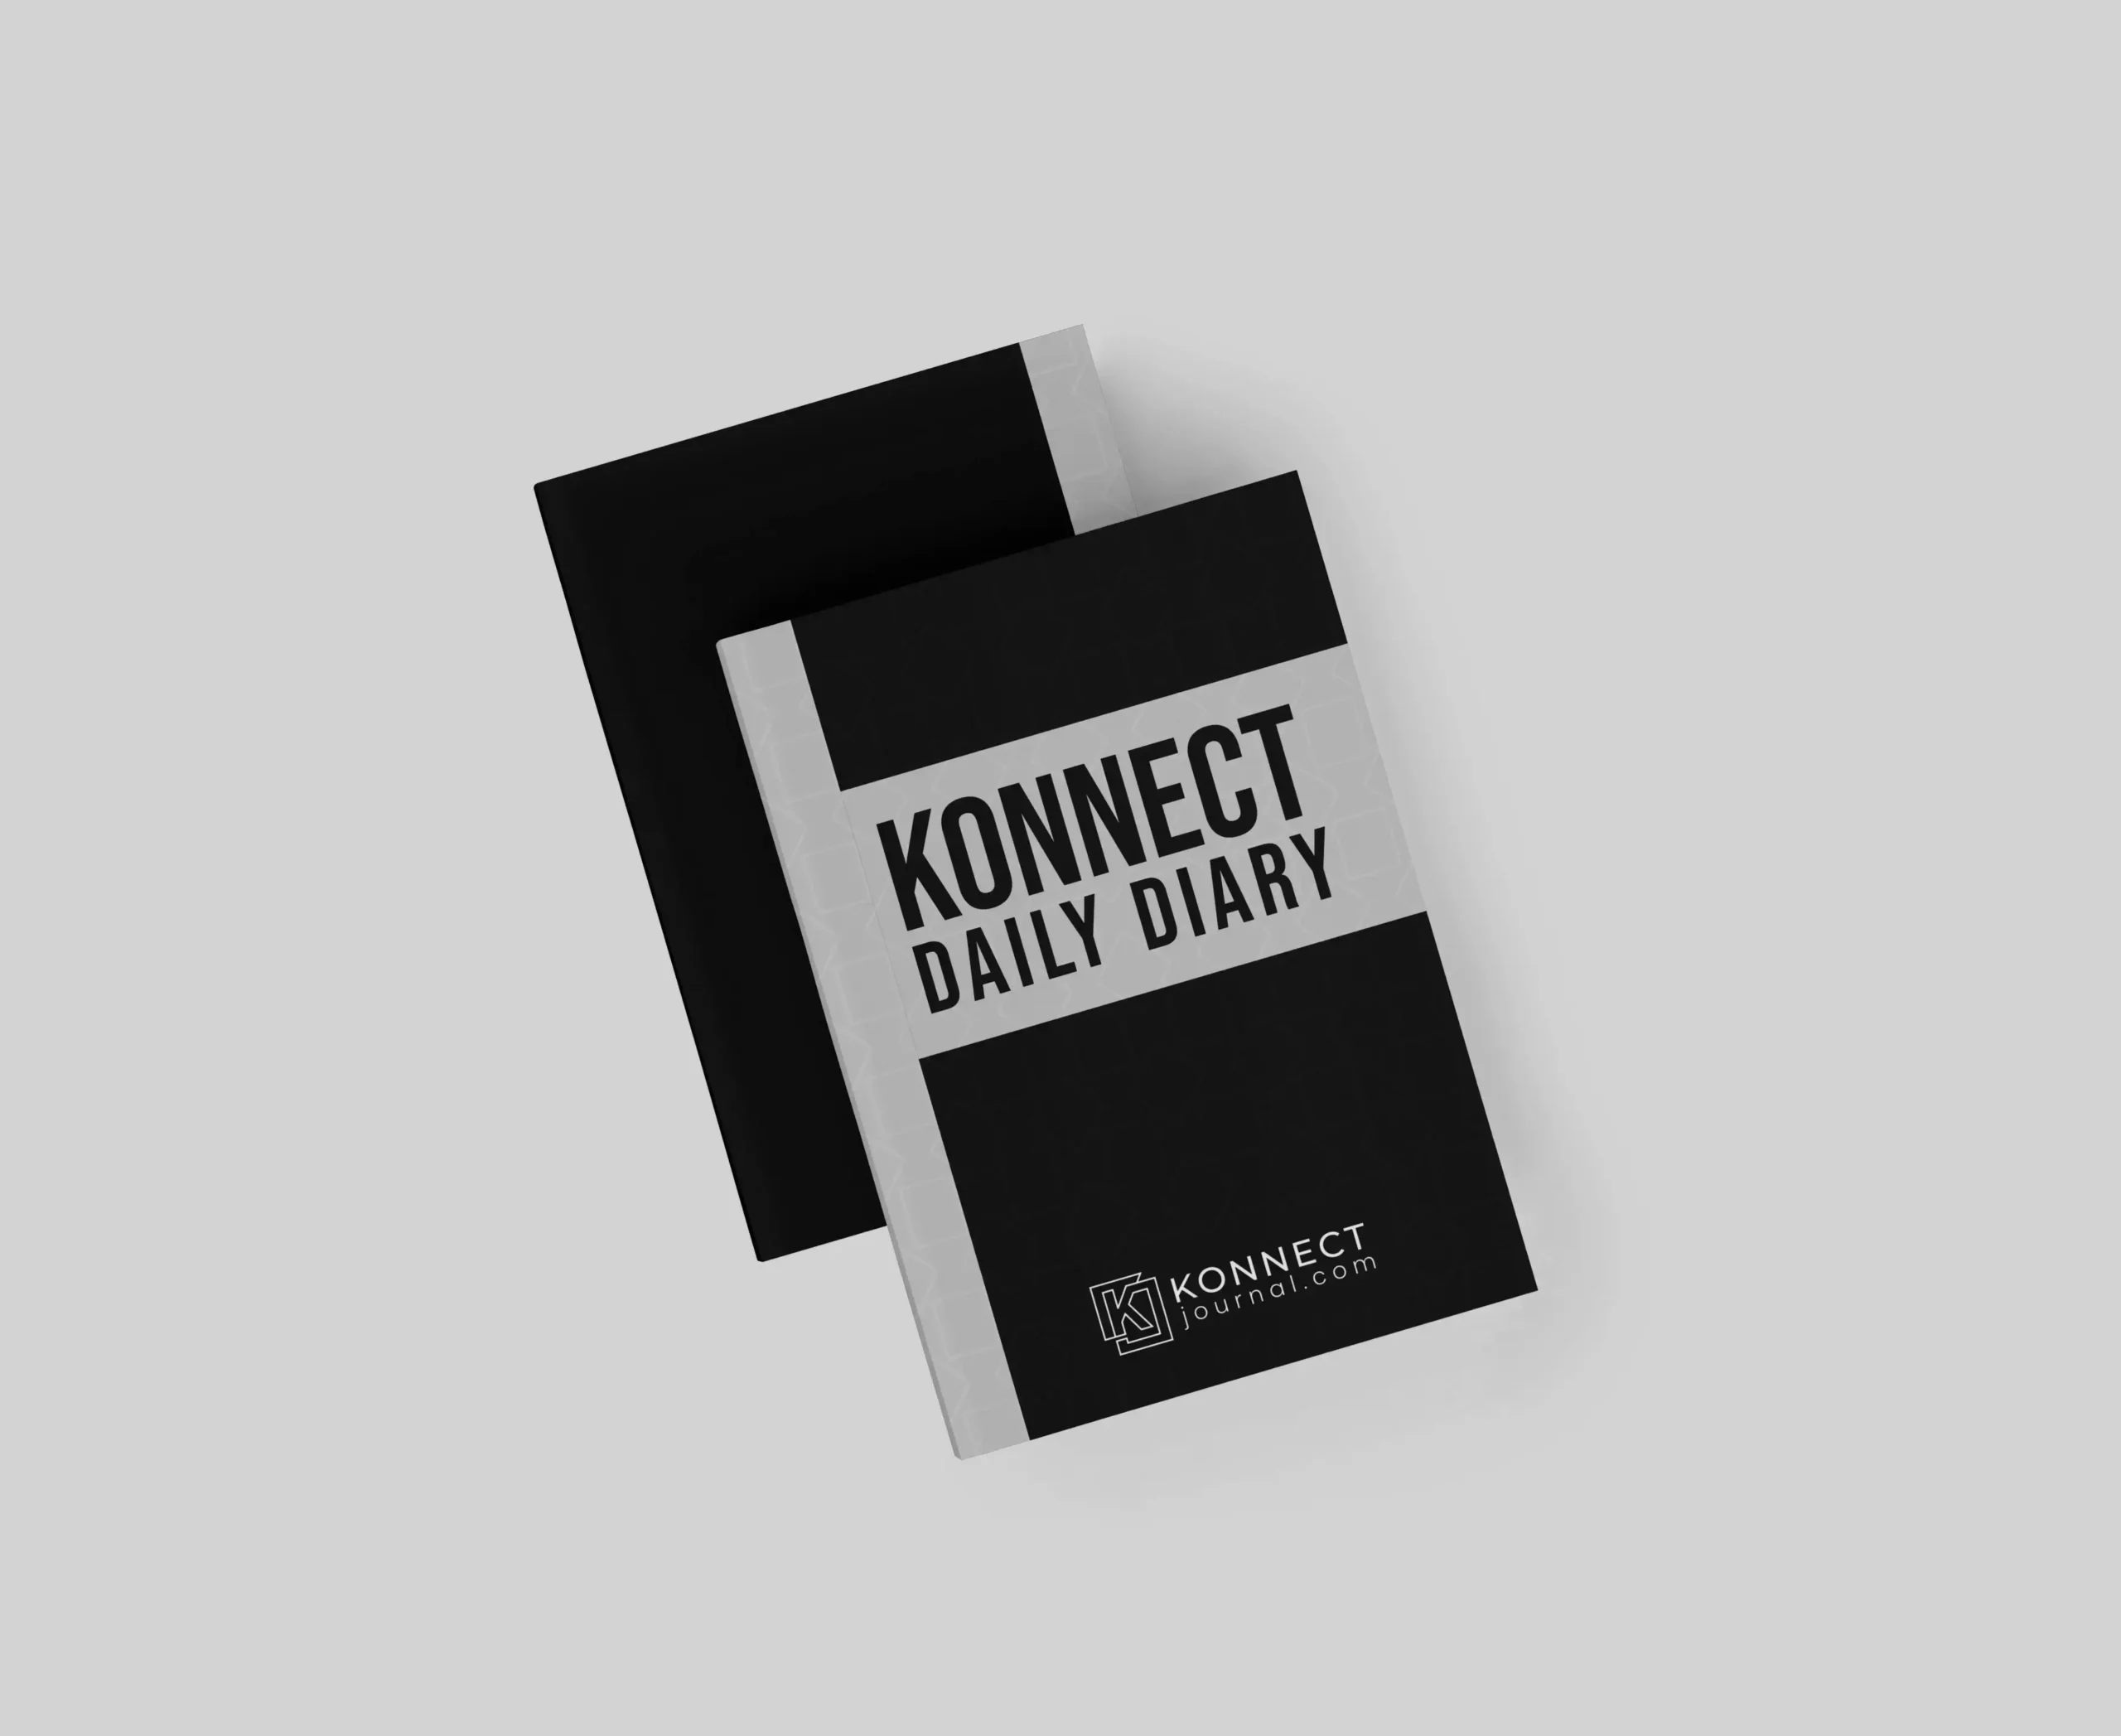 Konnect Daily Diary